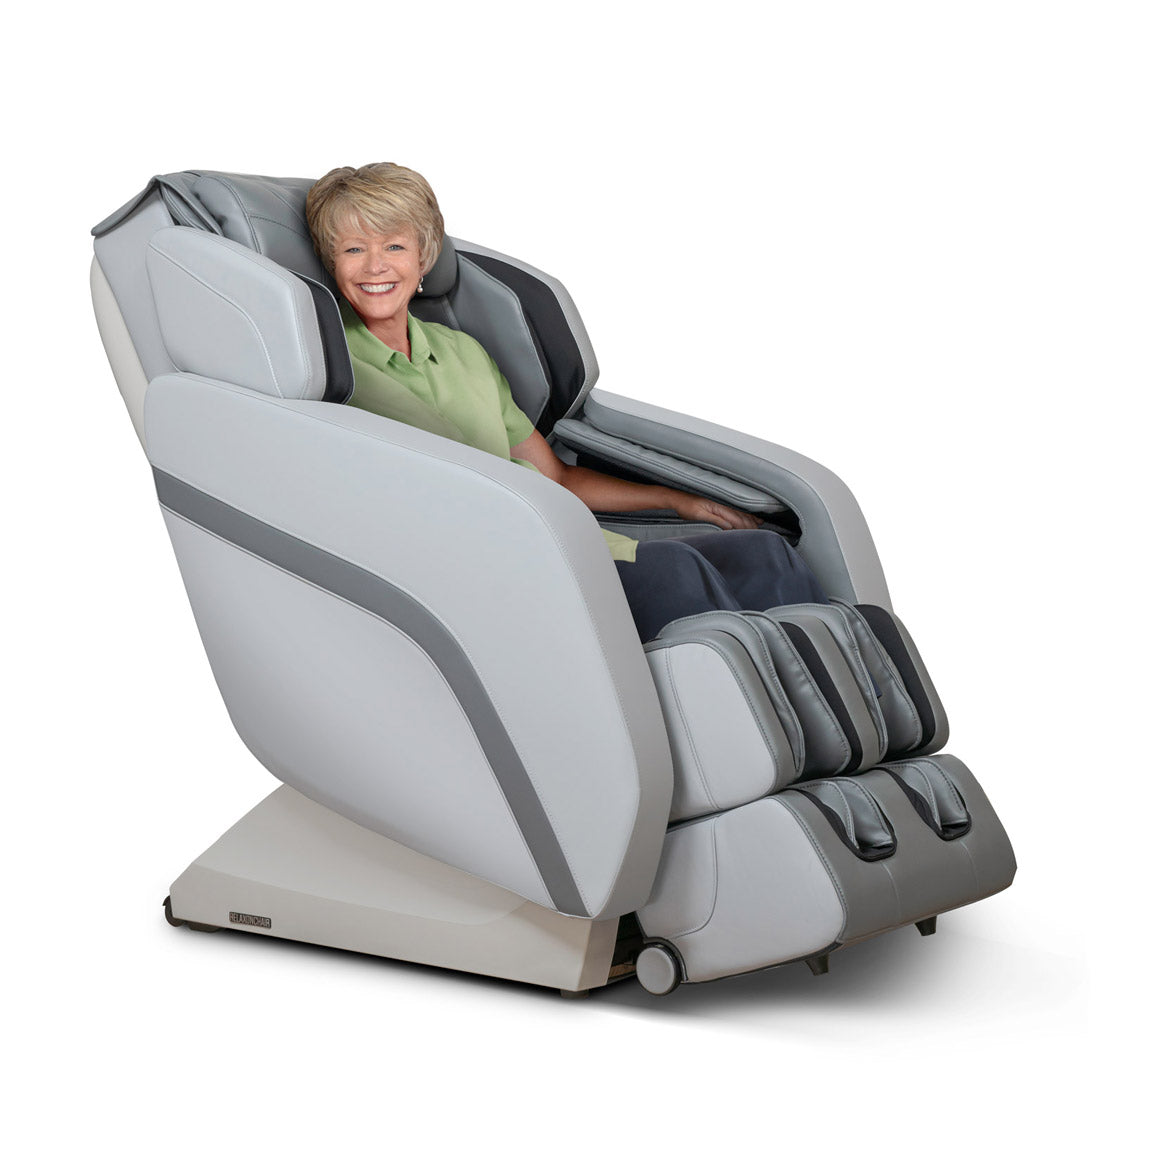 Airbag Massage Chairs: Here's What You Should Know